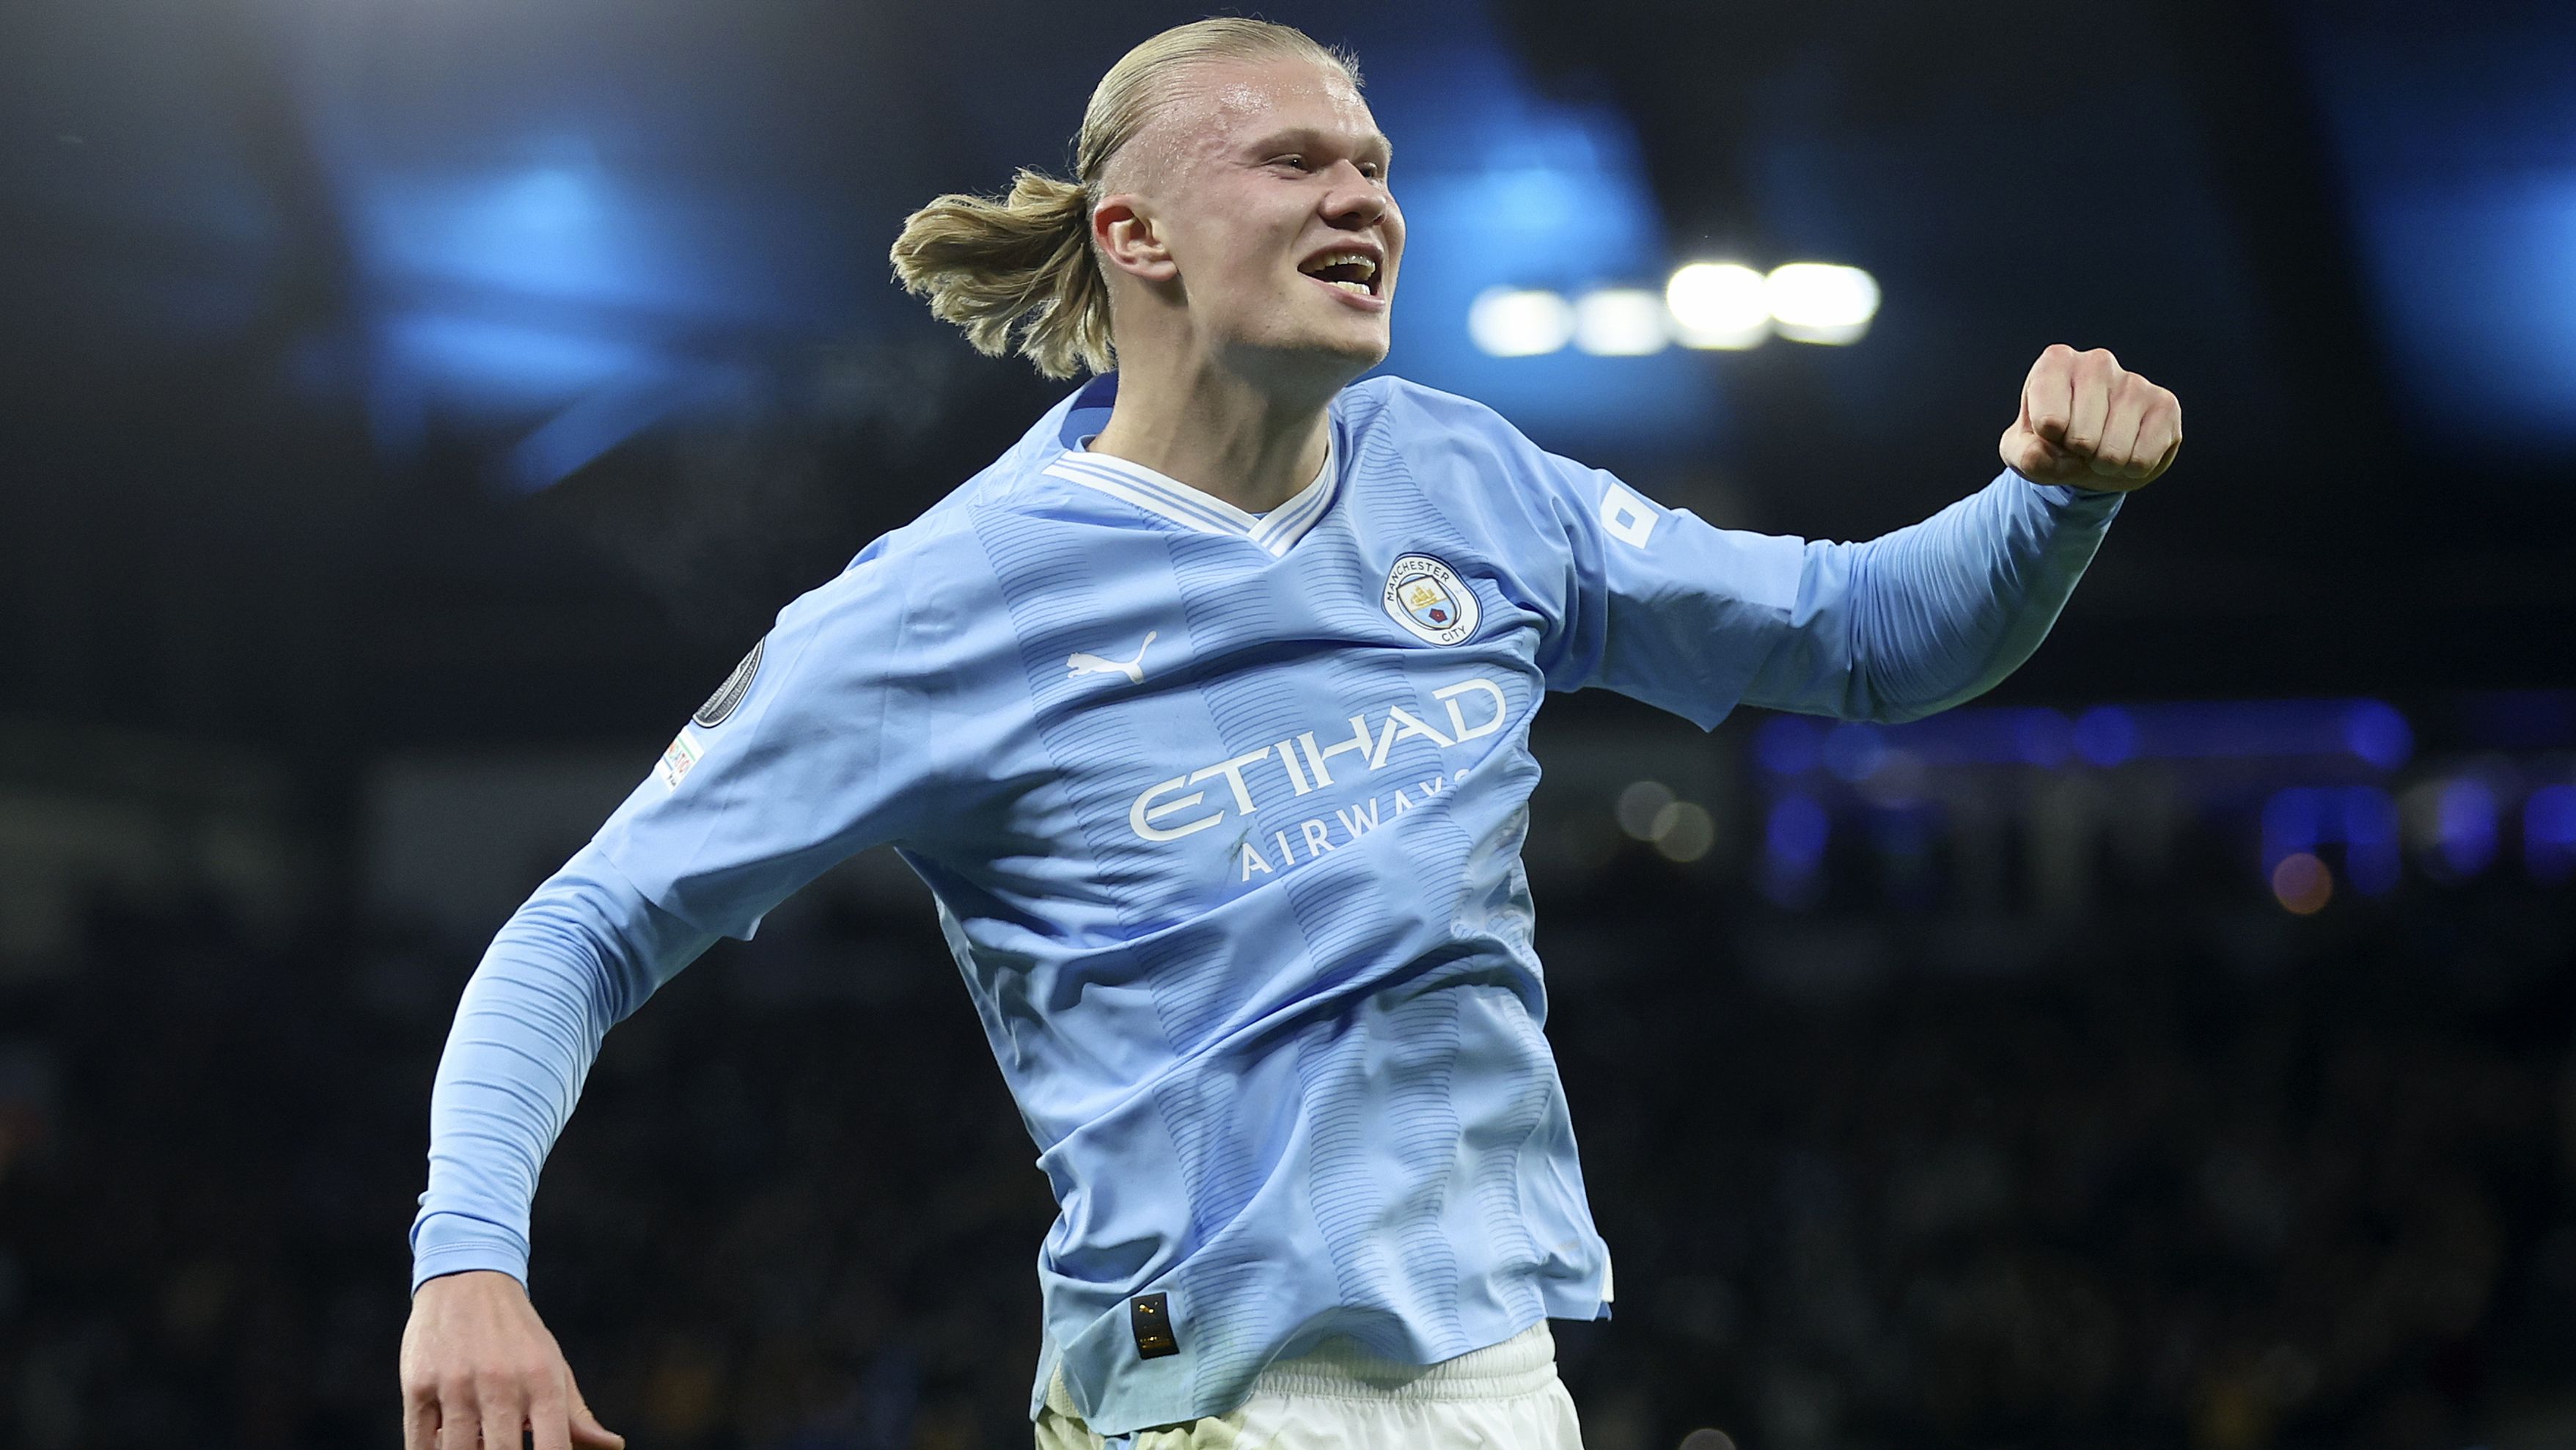 Erling Haaland of Manchester City celebrates.